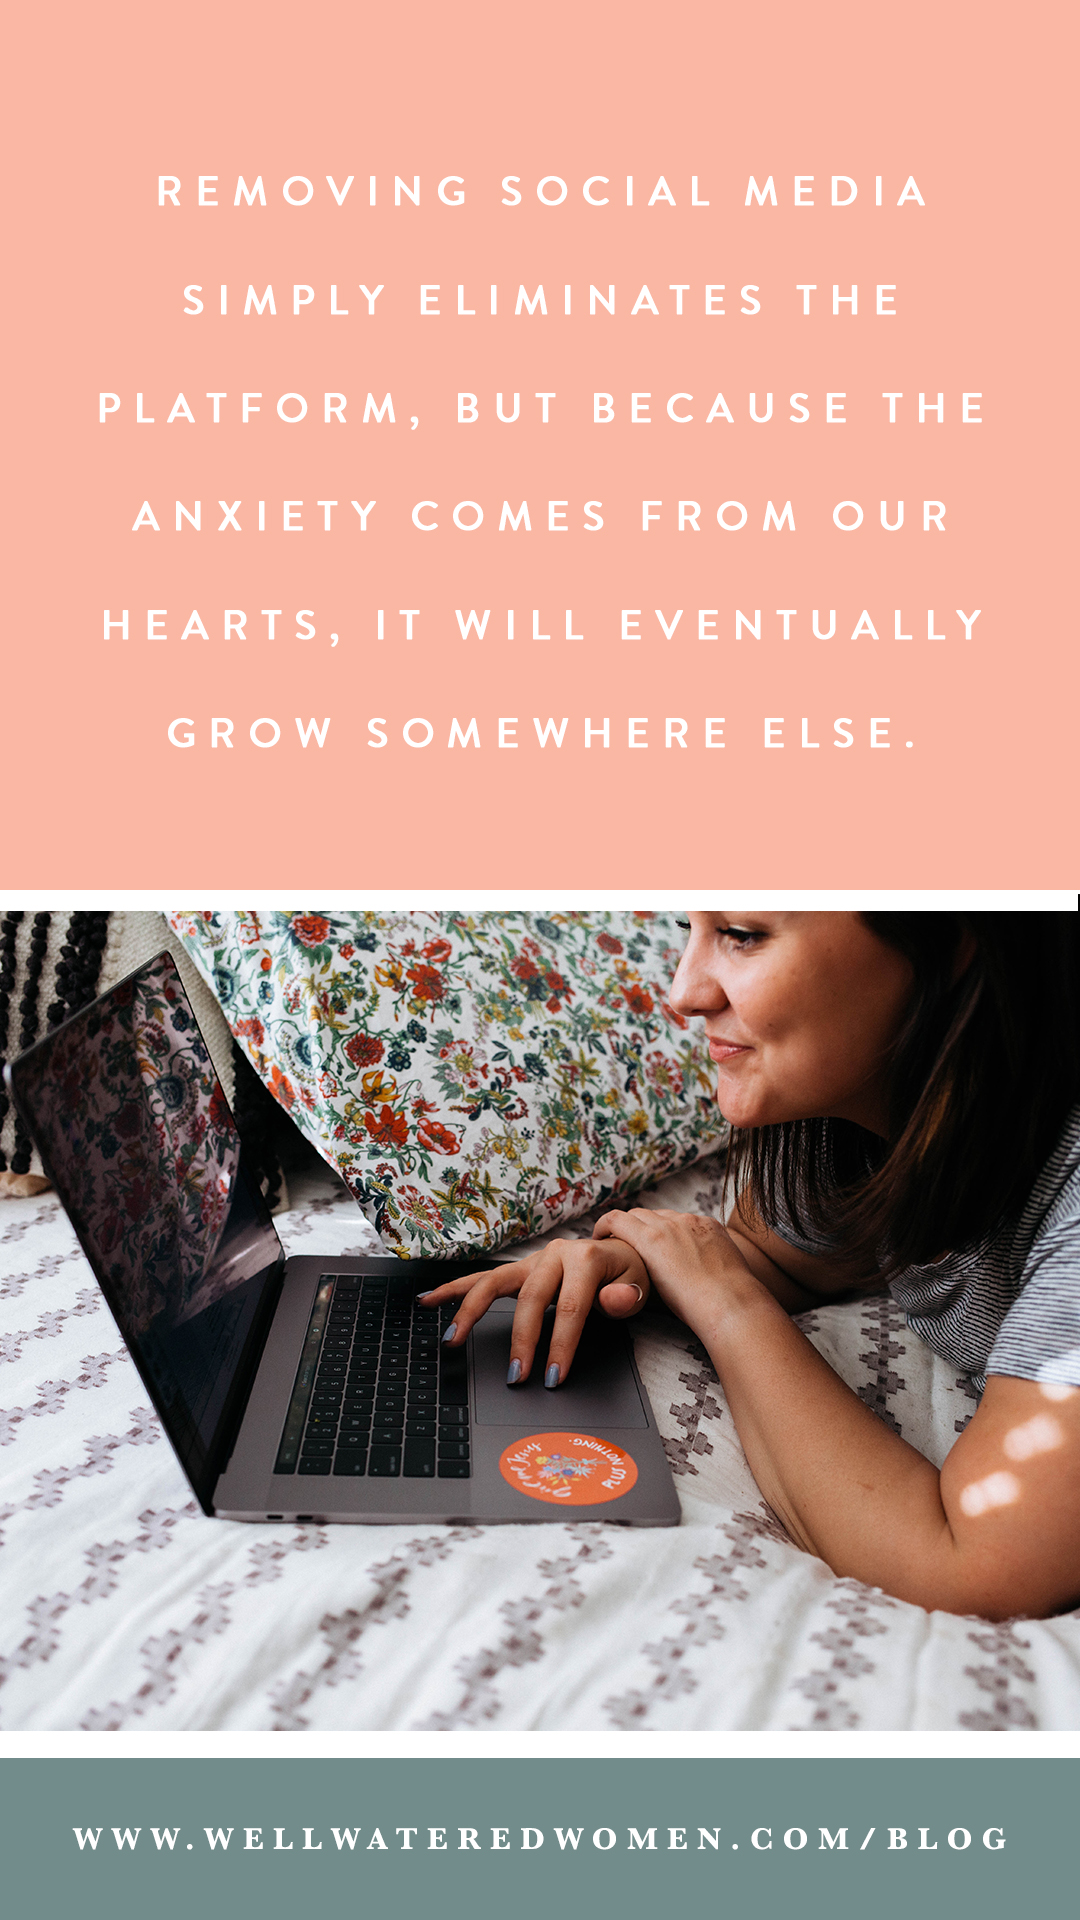 Social Media and Anxiety: Social media is a place our anxiety can flourish, but the root of our anxiety is found in our hearts. Removing social media simply eliminates the platform, but because the anxiety comes from our hearts, it will eventually grow somewhere else.